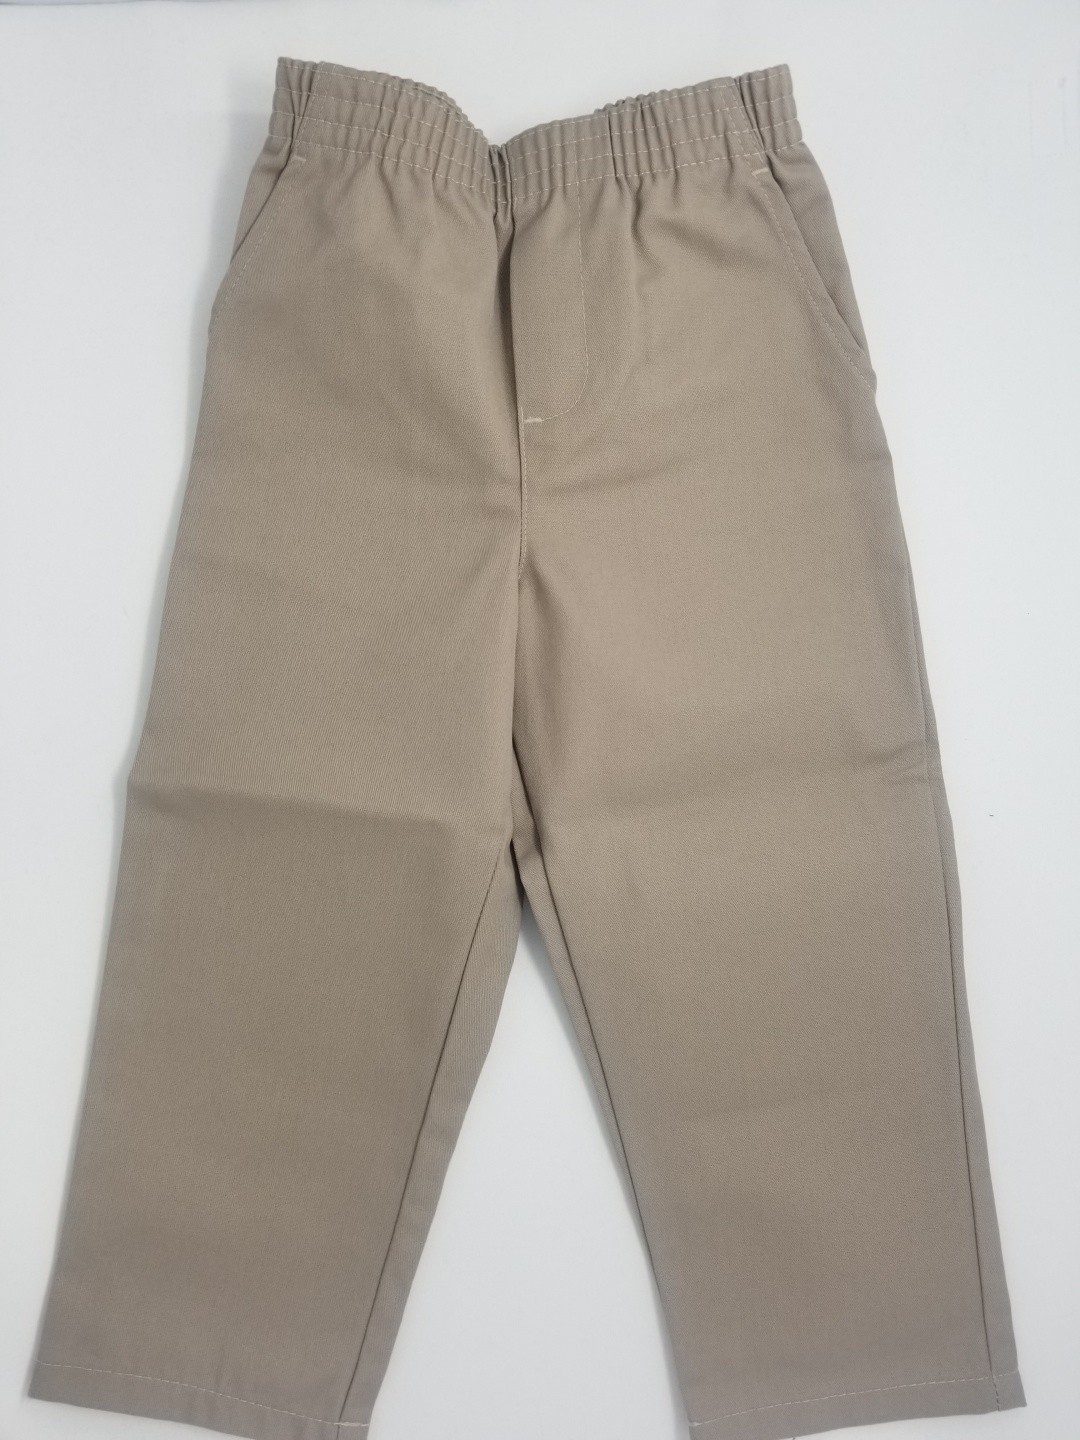 Toddler Pull-On Pant- Solid Colors-Khaki